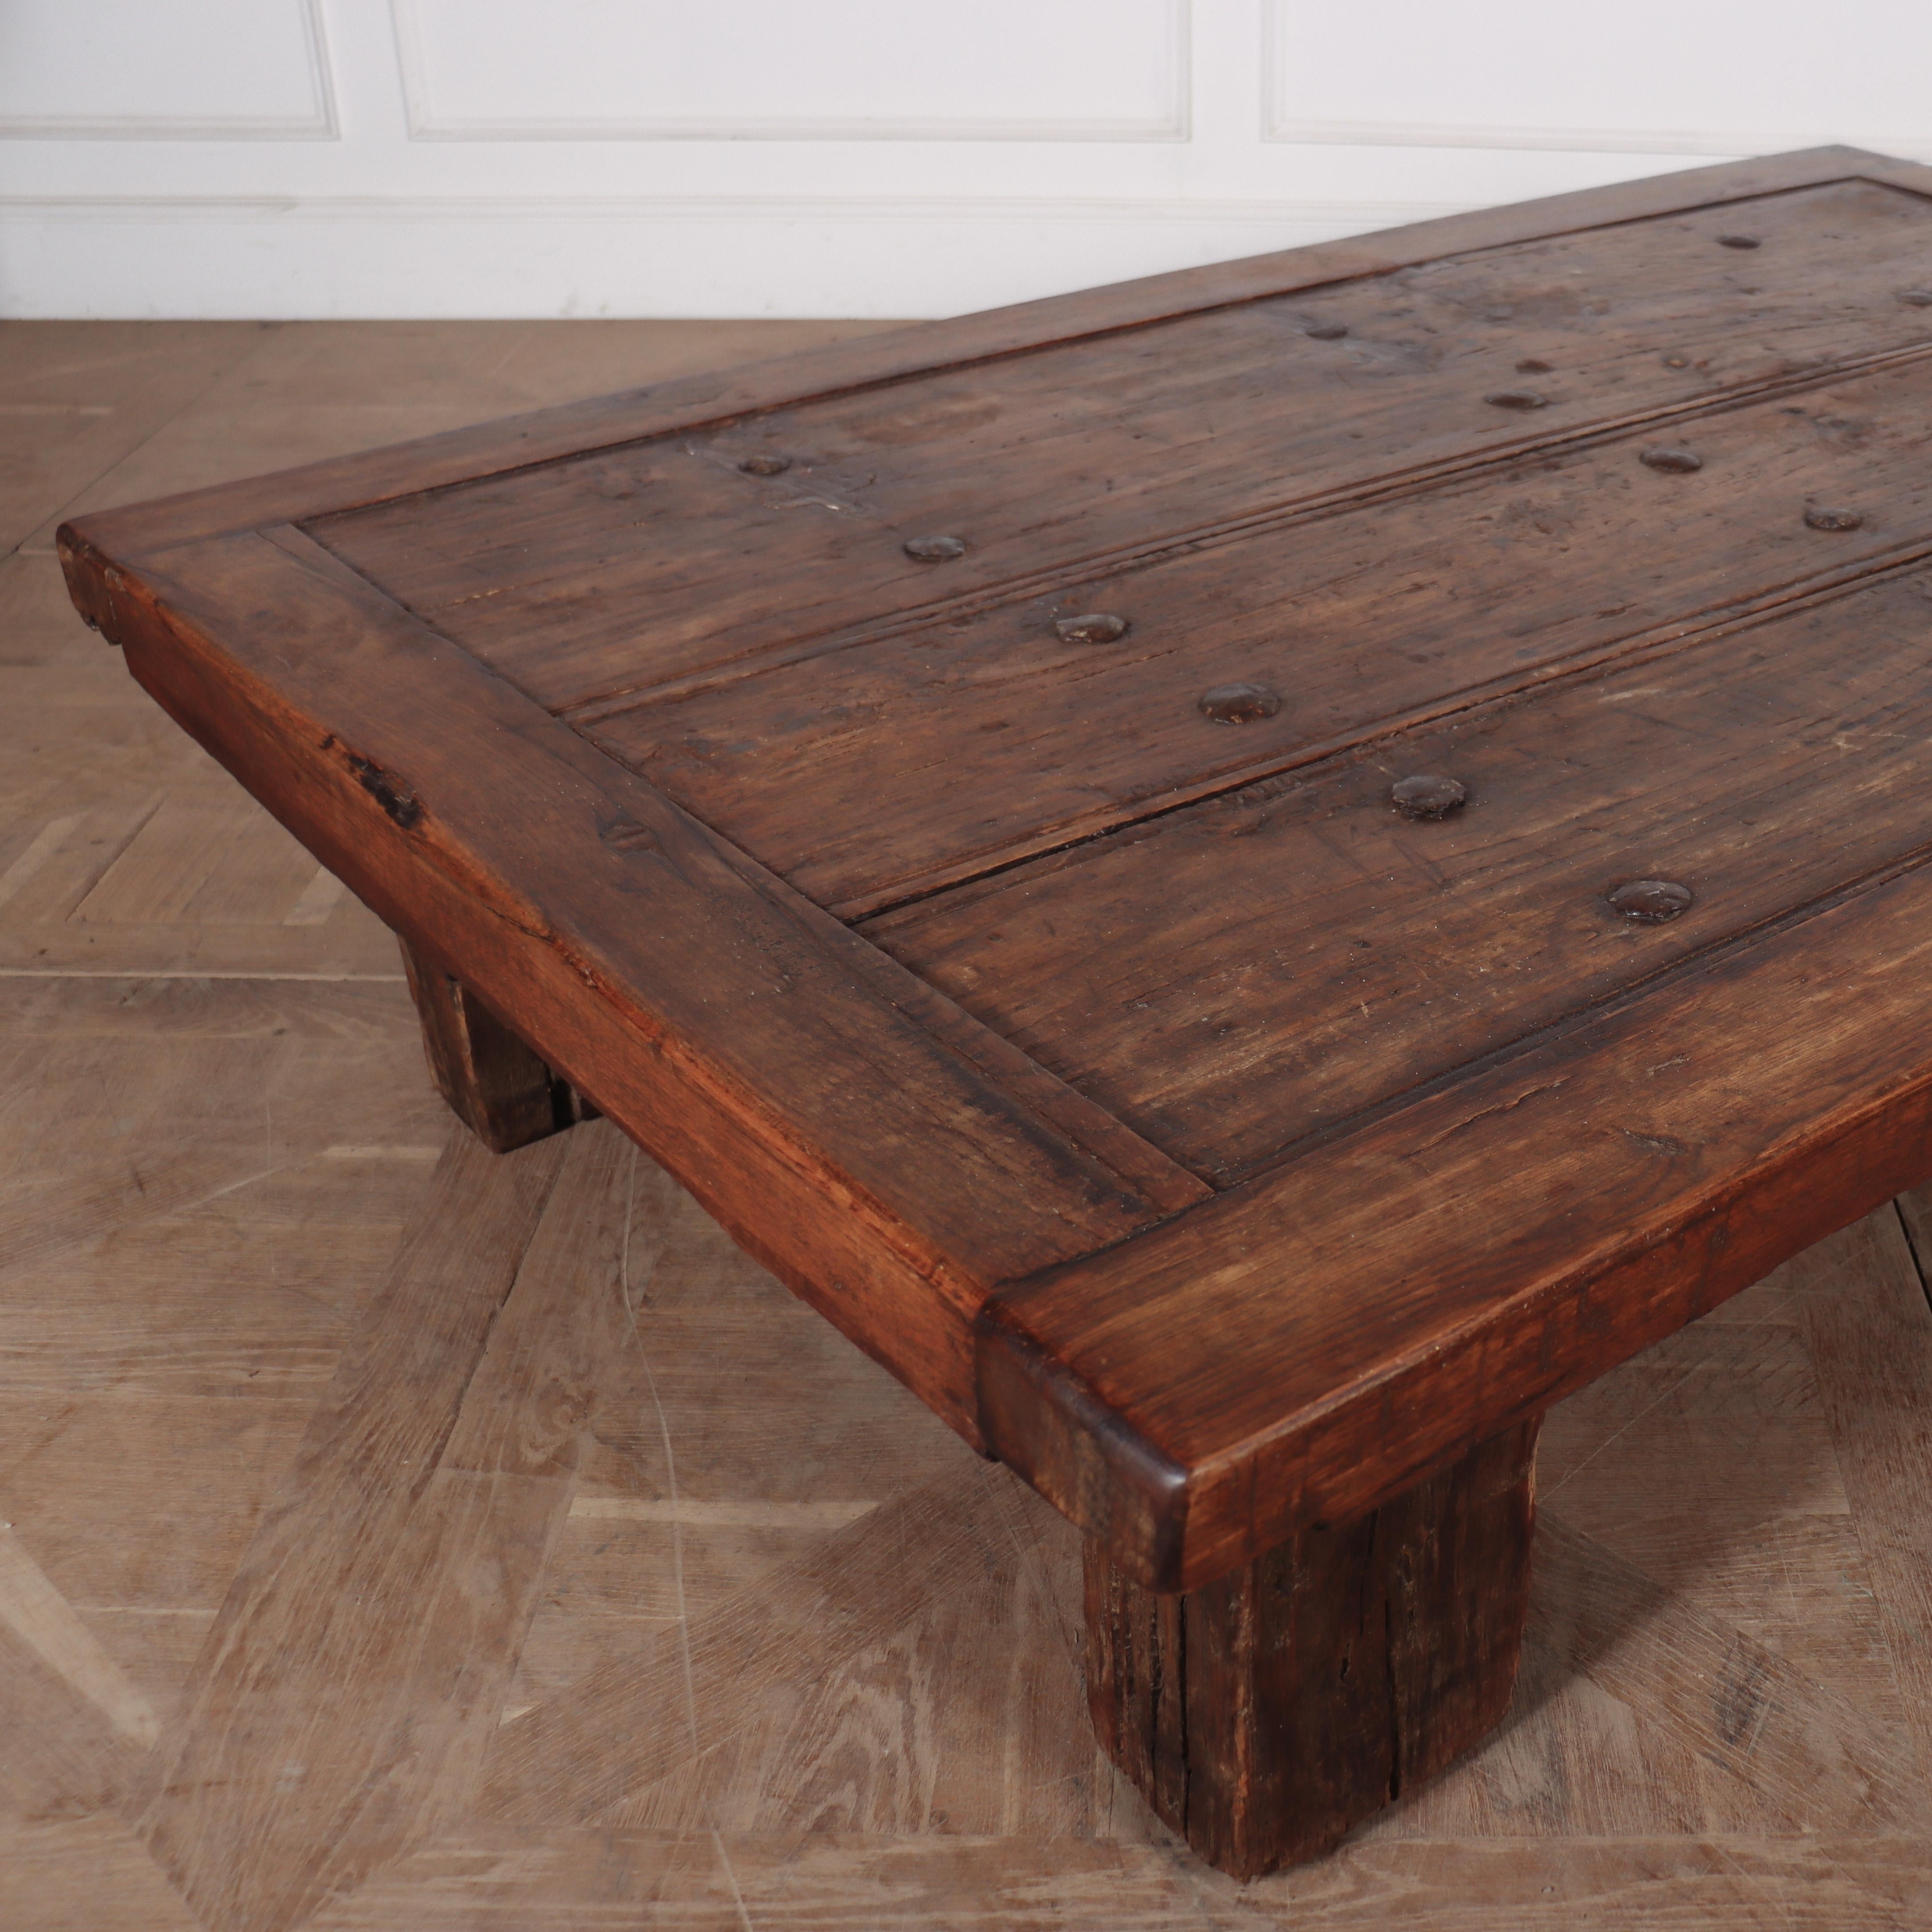 Large Studded Coffee Table In Good Condition For Sale In Leamington Spa, Warwickshire